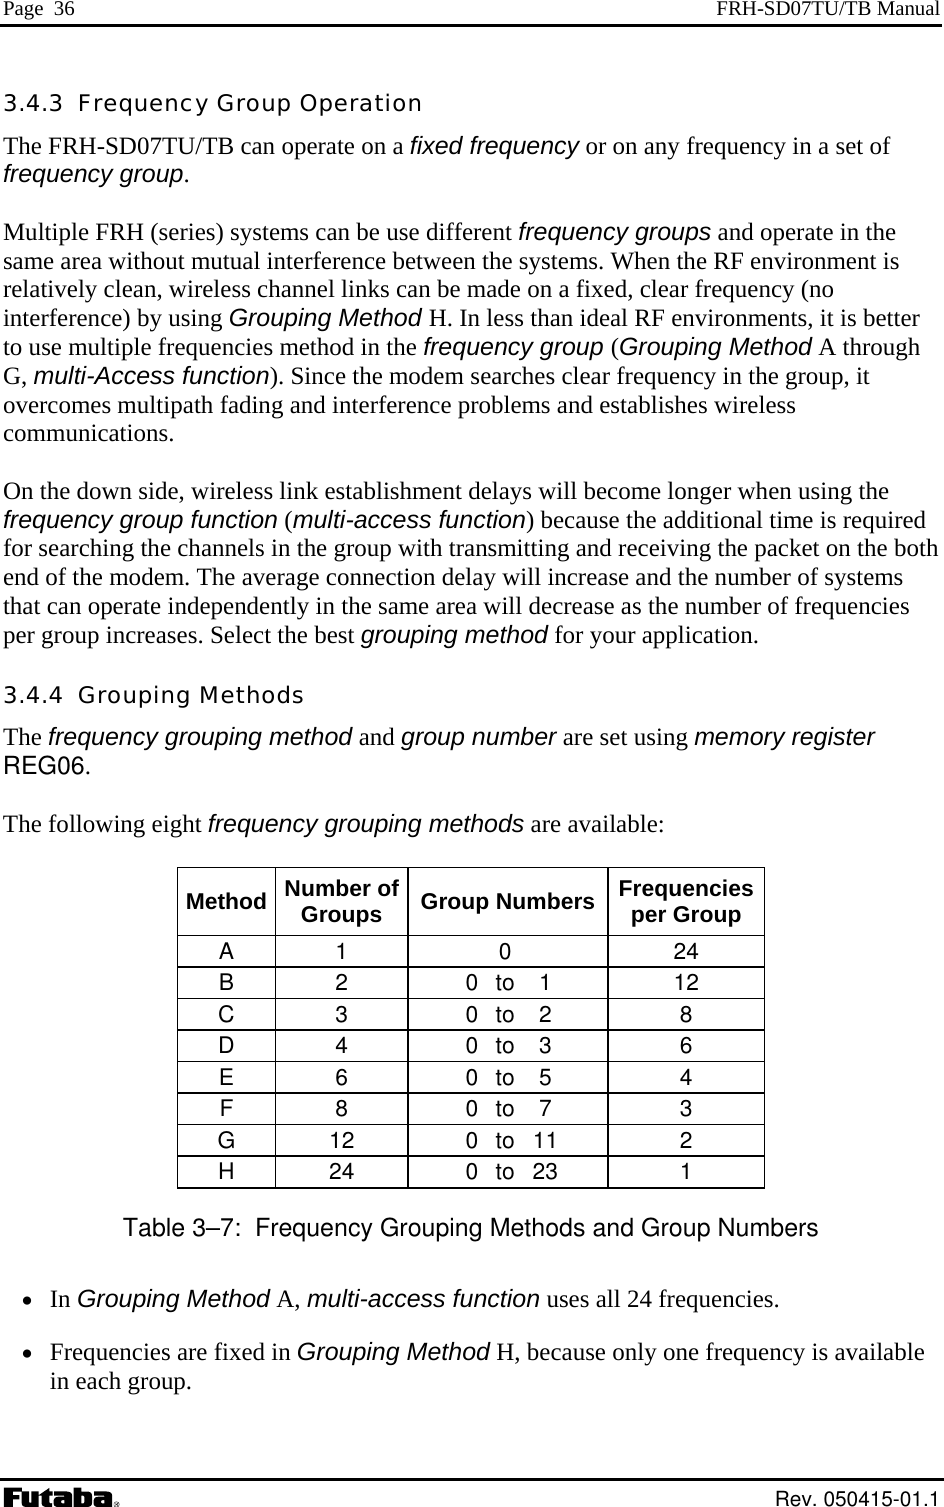 Page  36  FRH-SD07TU/TB Manual 3.4.3  Frequency Group Operation The FRH-SD07TU/TB can operate on a fixed frequency or on any frequency in a set of frequency group.  Multiple FRH (series) systems can be use different frequency groups and operate in the same area without mutual interference between the systems. When the RF environment is relatively clean, wireless channel links can be made on a fixed, clear frequency (no interference) by using Grouping Method H. In less than ideal RF environments, it is better to use multiple frequencies method in the frequency group (Grouping Method A through G, multi-Access function). Since the modem searches clear frequency in the group, it overcomes multipath fading and interference problems and establishes wireless communications.  On the down side, wireless link establishment delays will become longer when using the frequency group function (multi-access function) because the additional time is required for searching the channels in the group with transmitting and receiving the packet on the both end of the modem. The average connection delay will increase and the number of systems that can operate independently in the same area will decrease as the number of frequencies per group increases. Select the best grouping method for your application. 3.4.4  Grouping Methods The frequency grouping method and group number are set using memory register REG06.  The following eight frequency grouping methods are available:  Method  Number of Groups  Group Numbers Frequencies per Group A 1  0  24 B 2  0 to 1  12 C 3  0 to 2  8 D 4  0 to 3  6 E 6  0 to 5  4 F 8  0 to 7  3 G 12  0 to 11  2 H 24  0 to 23  1 Table 3–7:  Frequency Grouping Methods and Group Numbers •  In Grouping Method A, multi-access function uses all 24 frequencies. •  Frequencies are fixed in Grouping Method H, because only one frequency is available in each group.  Rev. 050415-01.1 